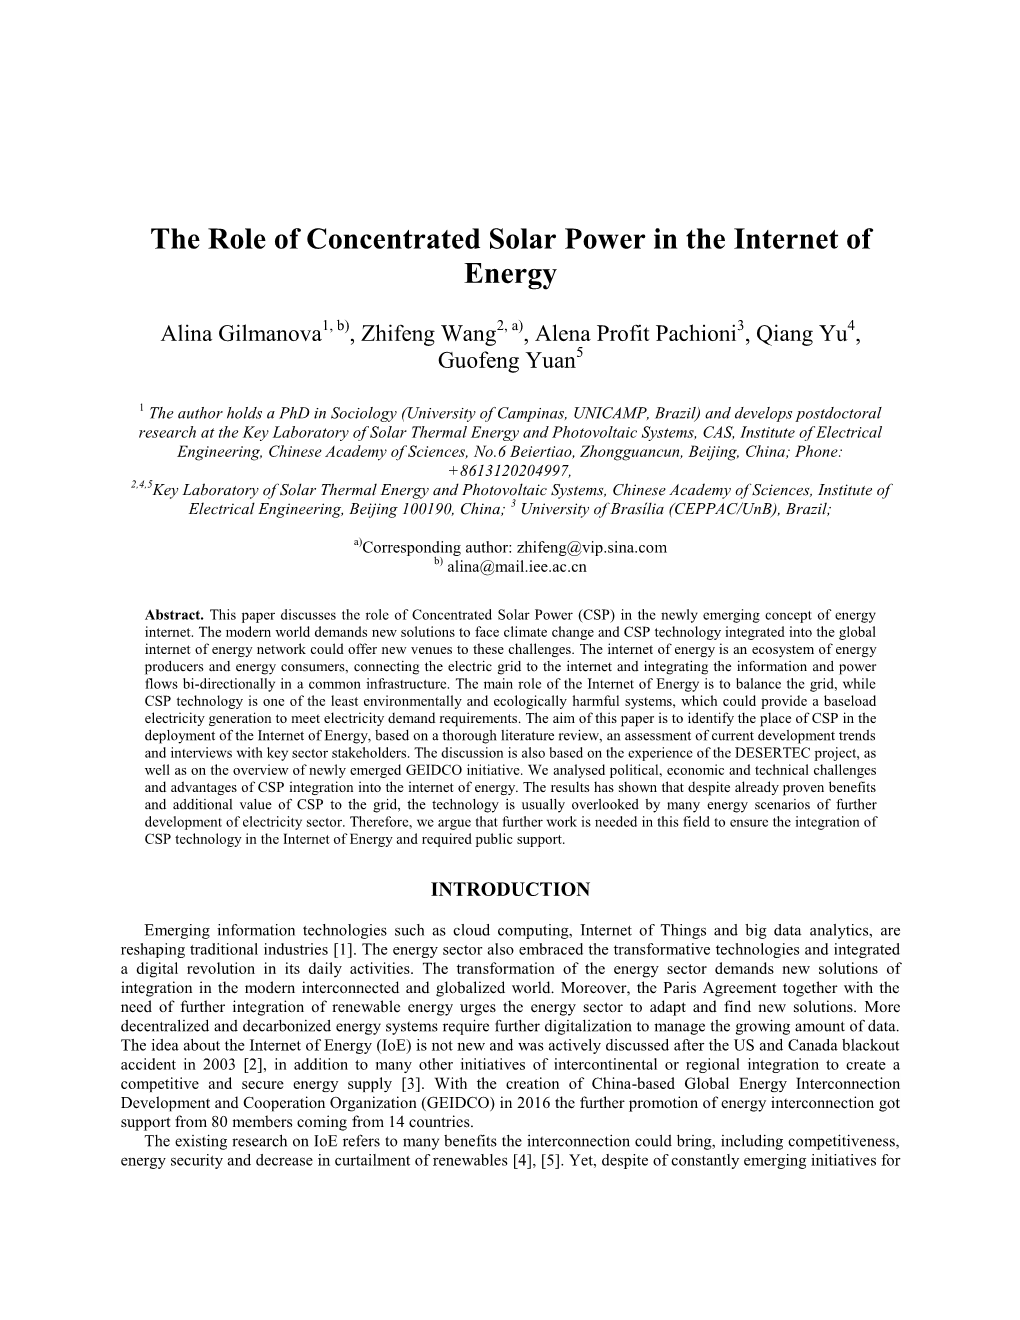 The Role of Concentrated Solar Power in the Internet of Energy